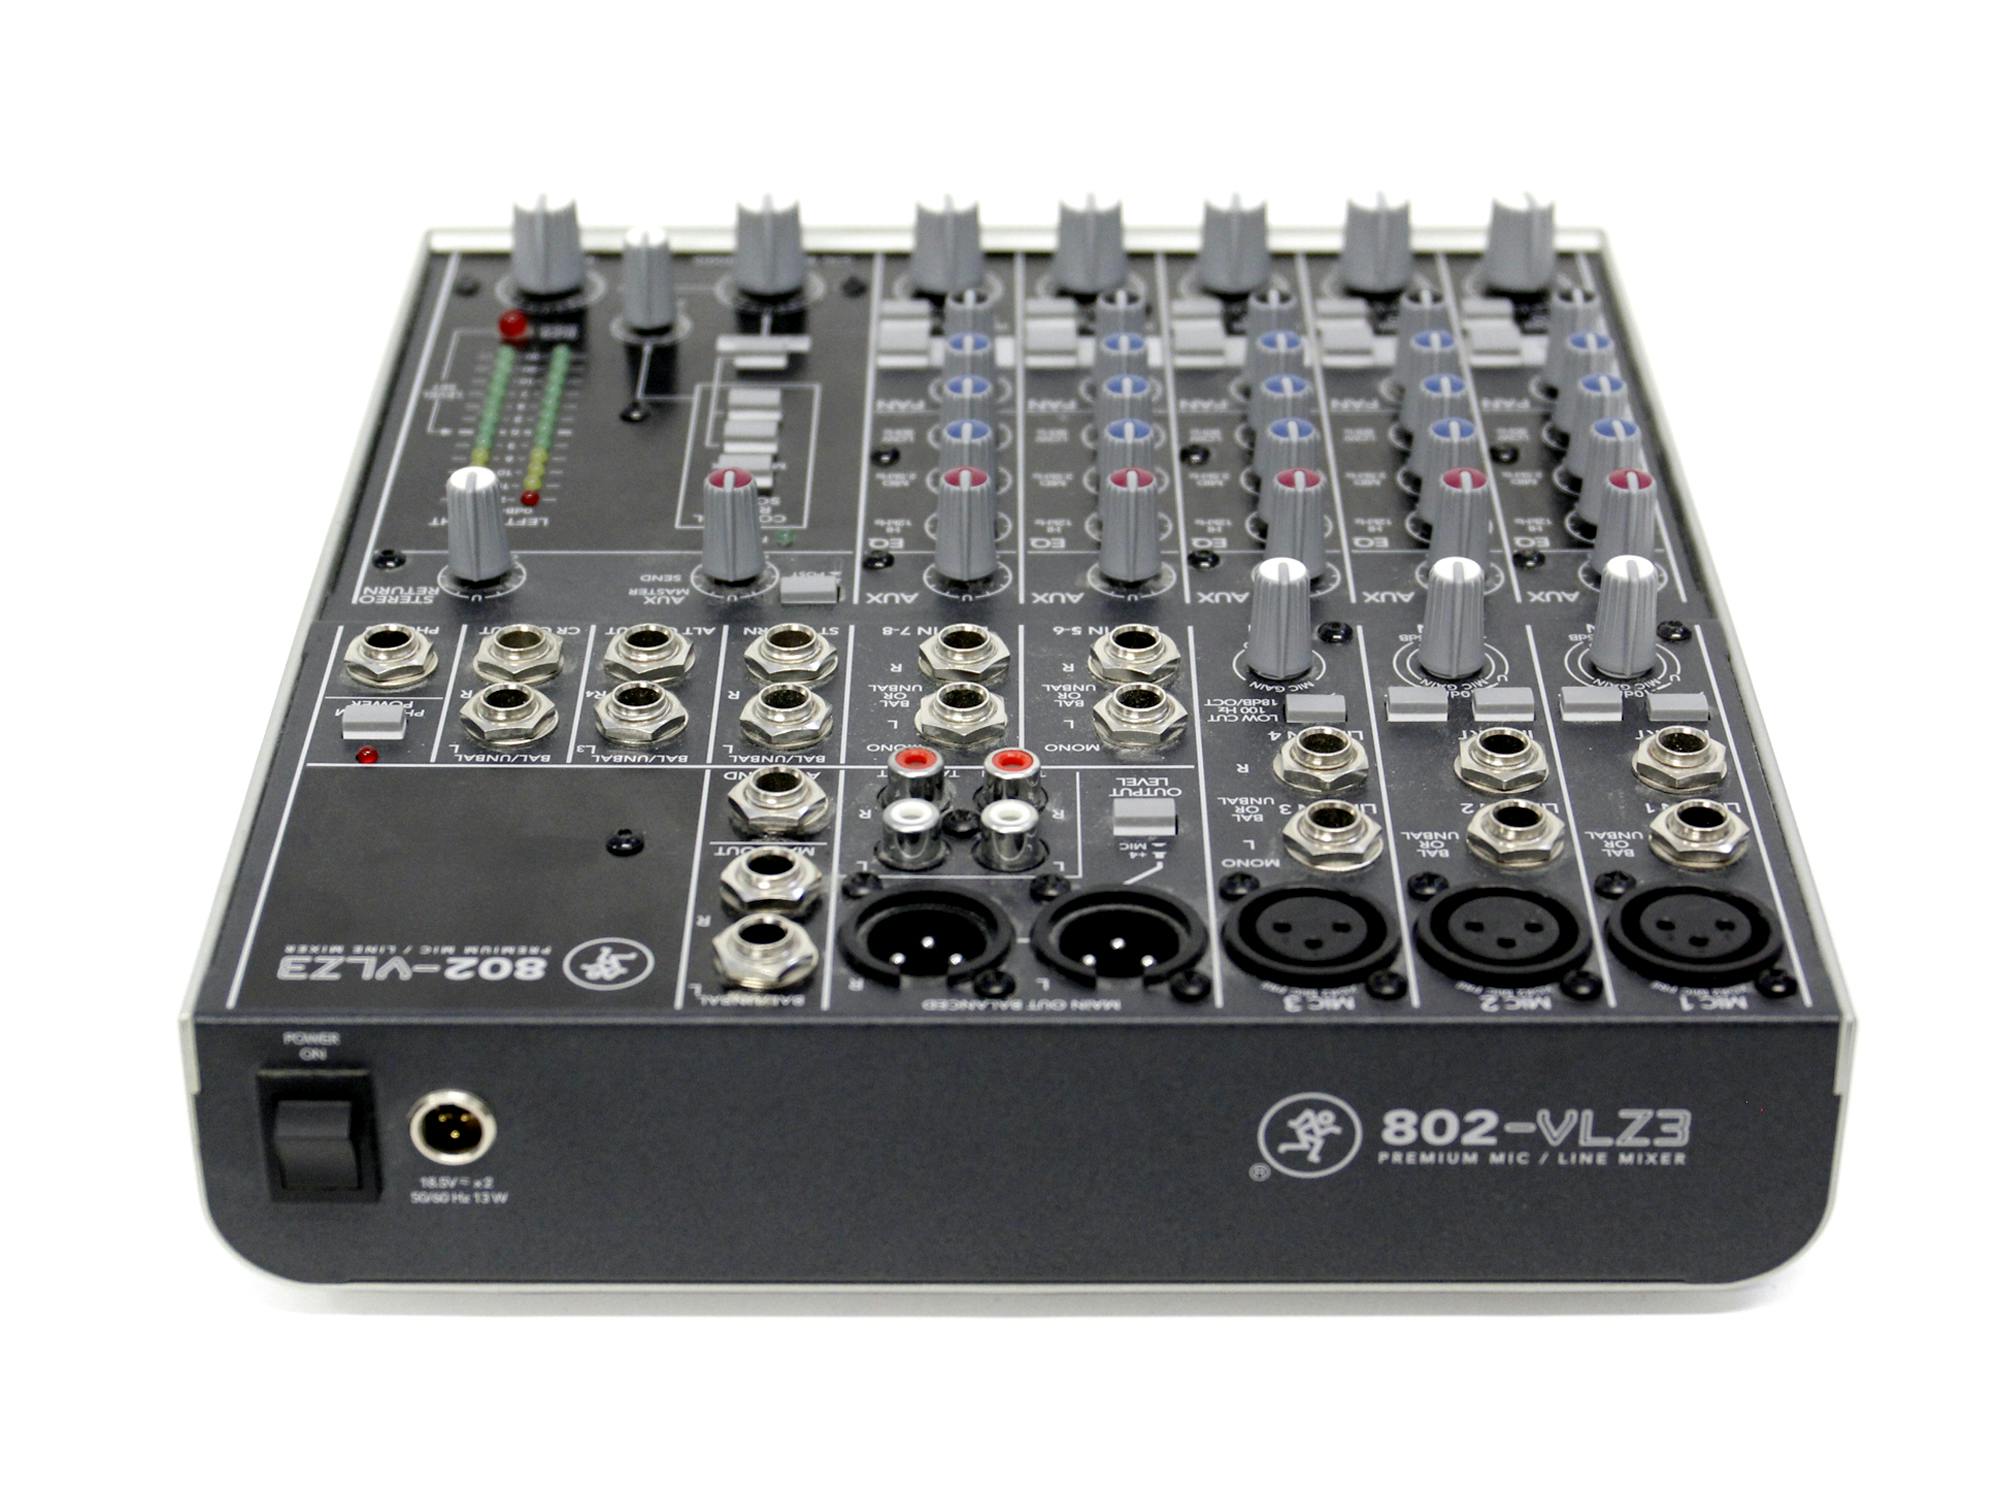 Second Hand Mackie 802-VLZ3 8 Channel Mixer - Andertons Music Co.